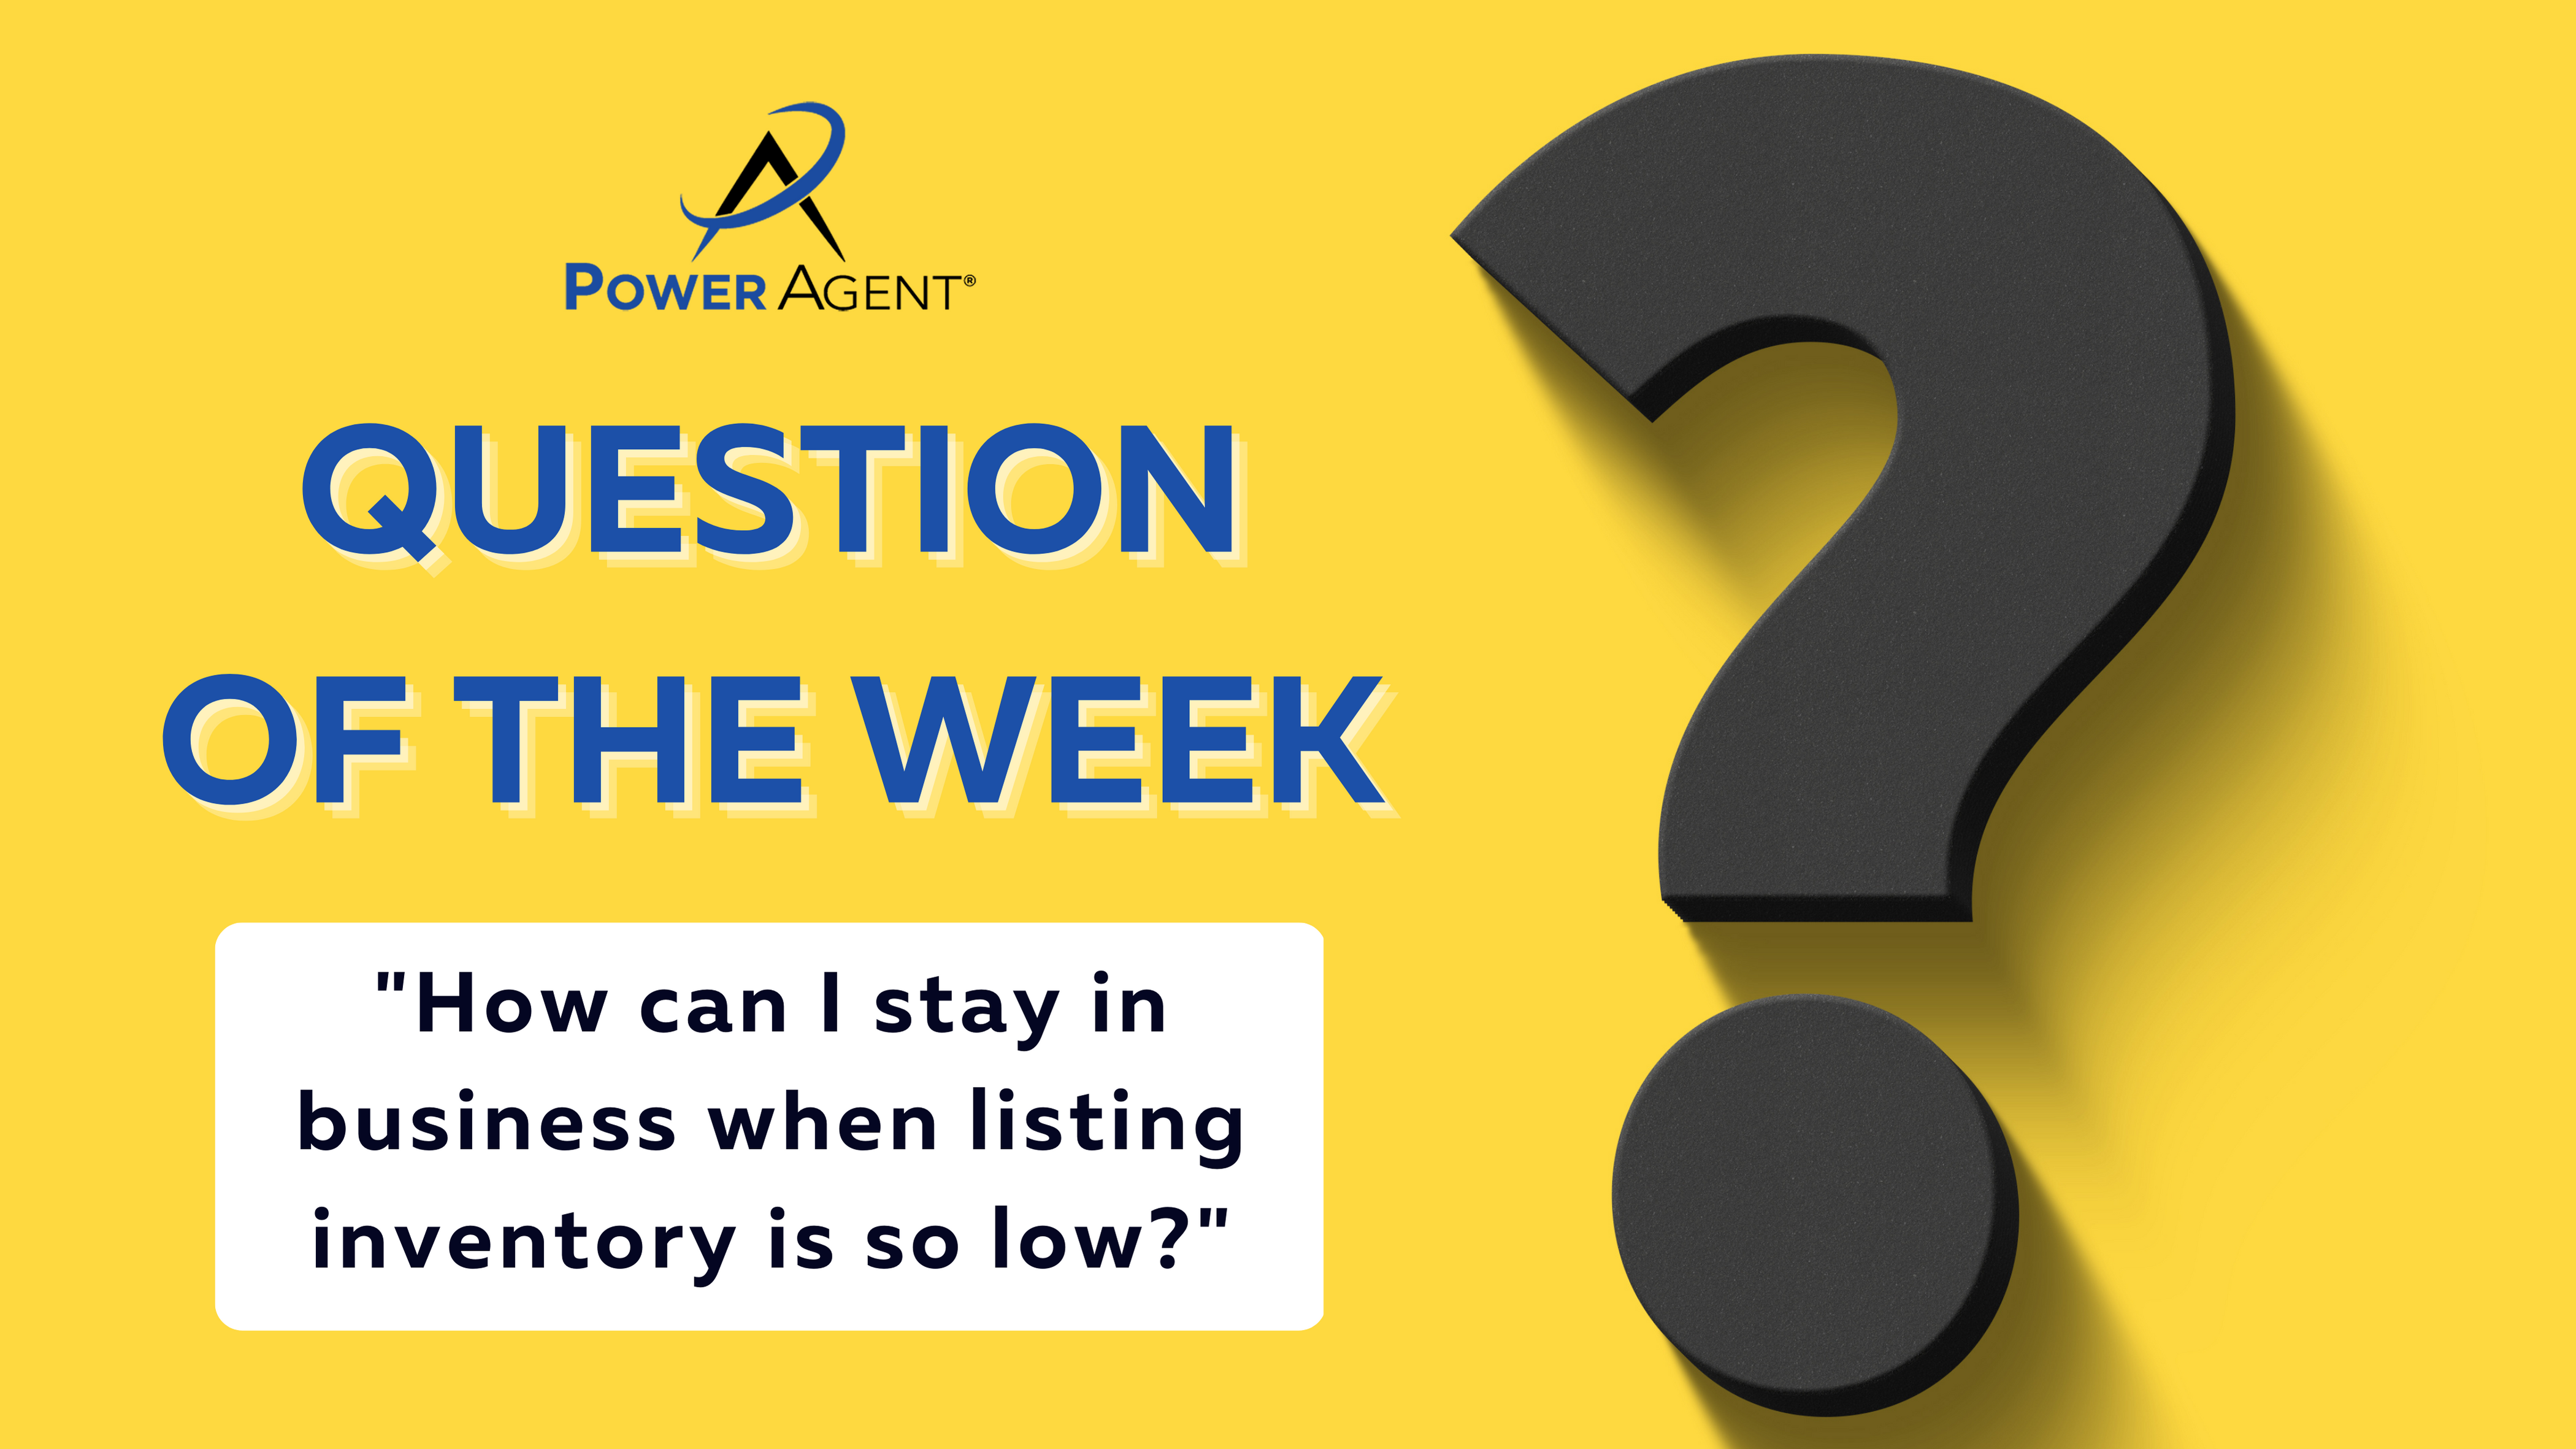 How can I stay in business when listing inventory is so low?